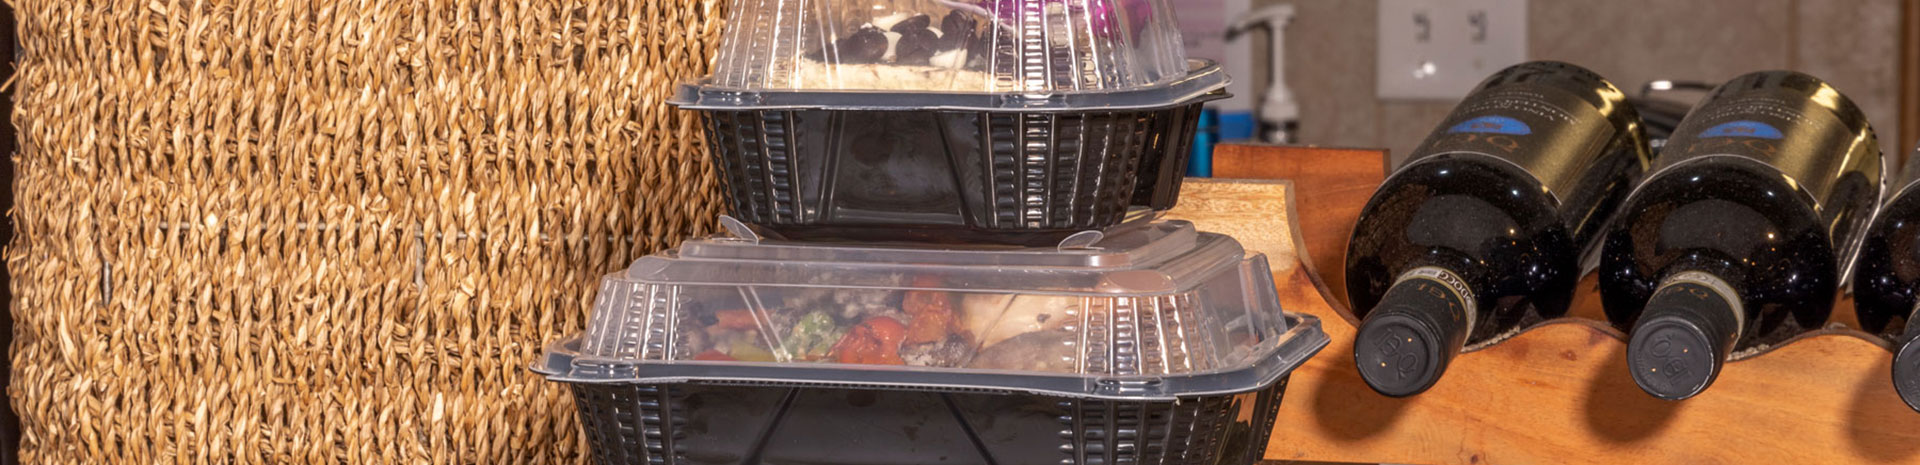 hinged food containers filled and ready for pick up next to wine bottles